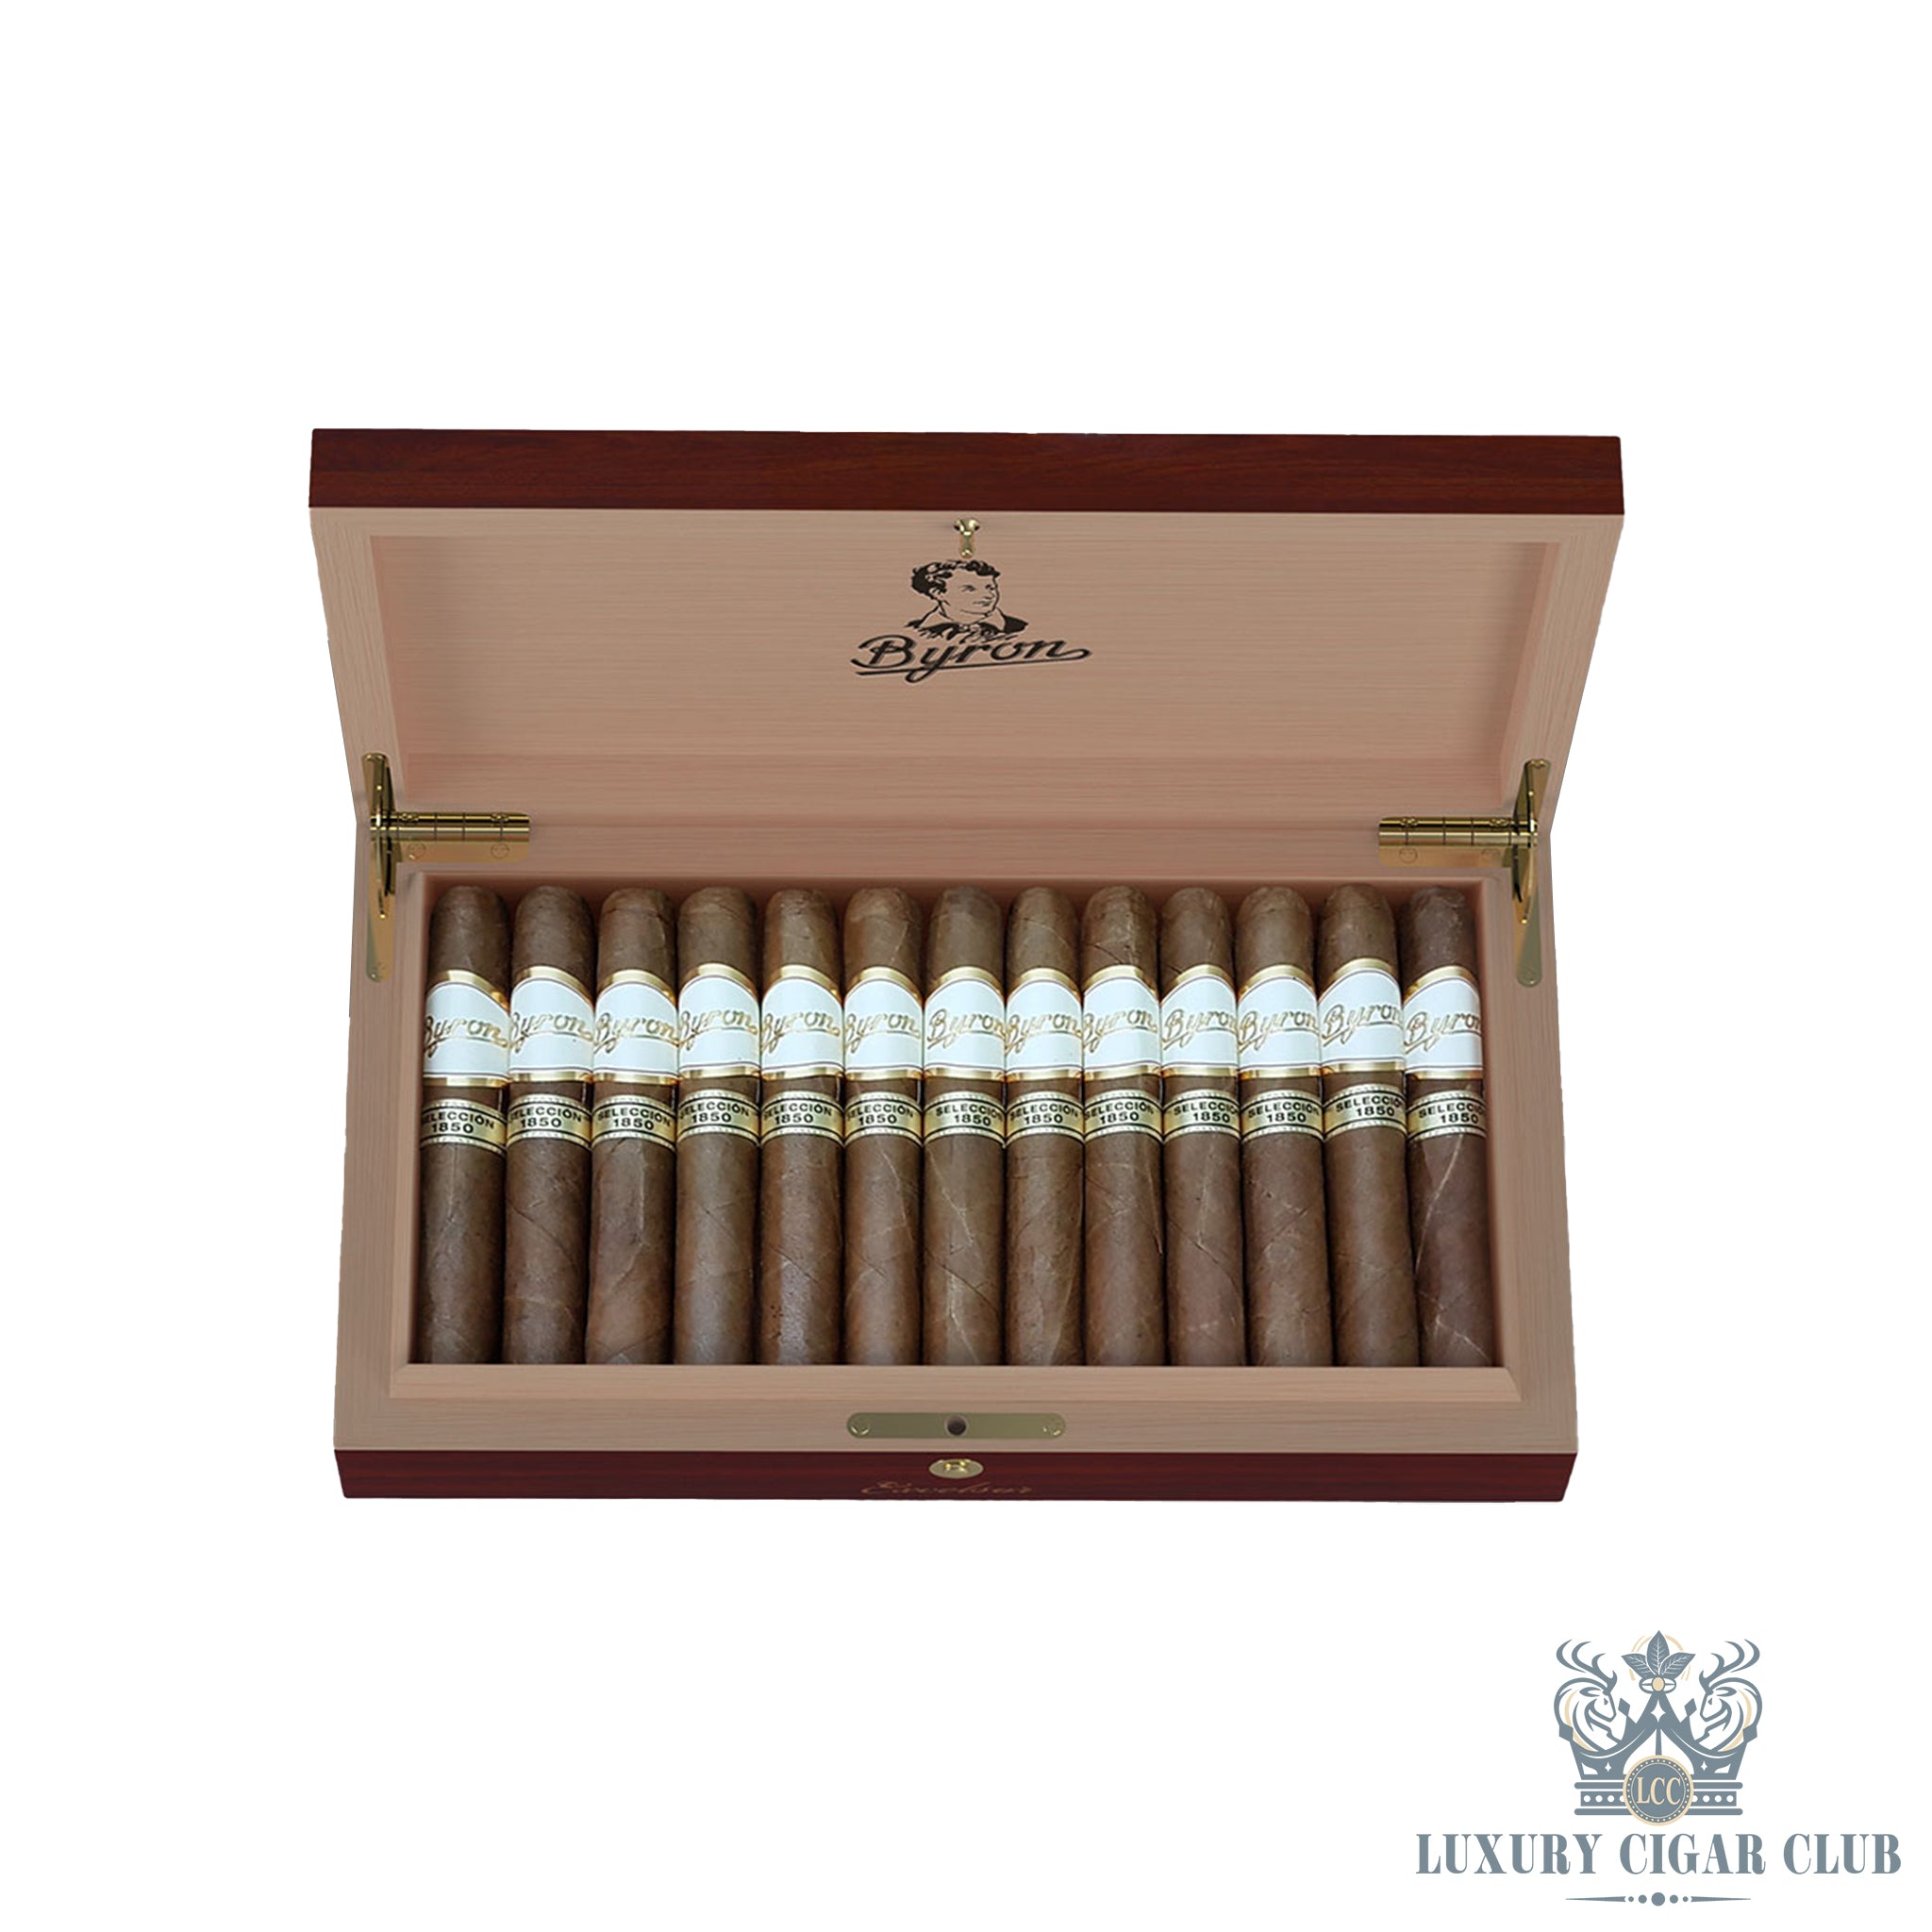 Buy Byron Seleccion 1850 Excelsor Box of 25 Cigars Online